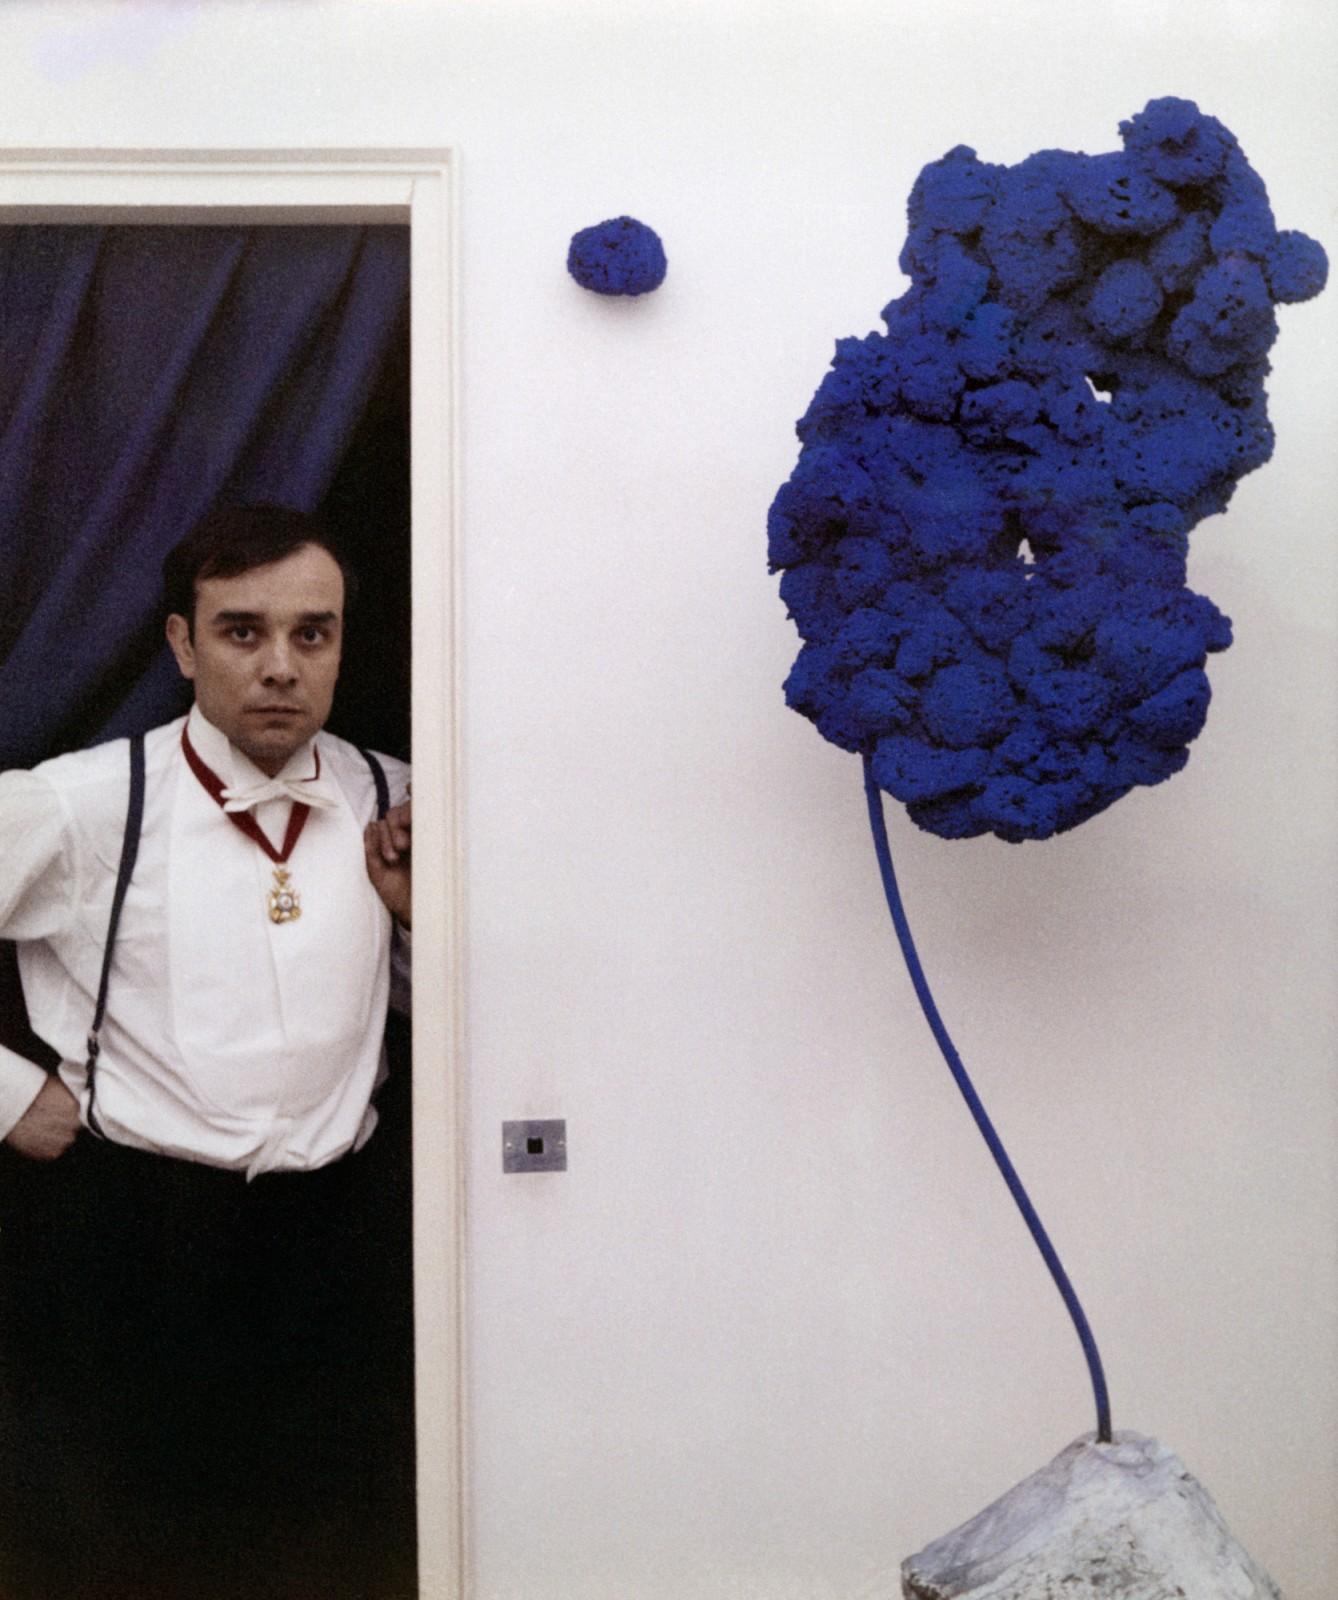 Yves Klein with his Sponge Sculpture (SE 167)